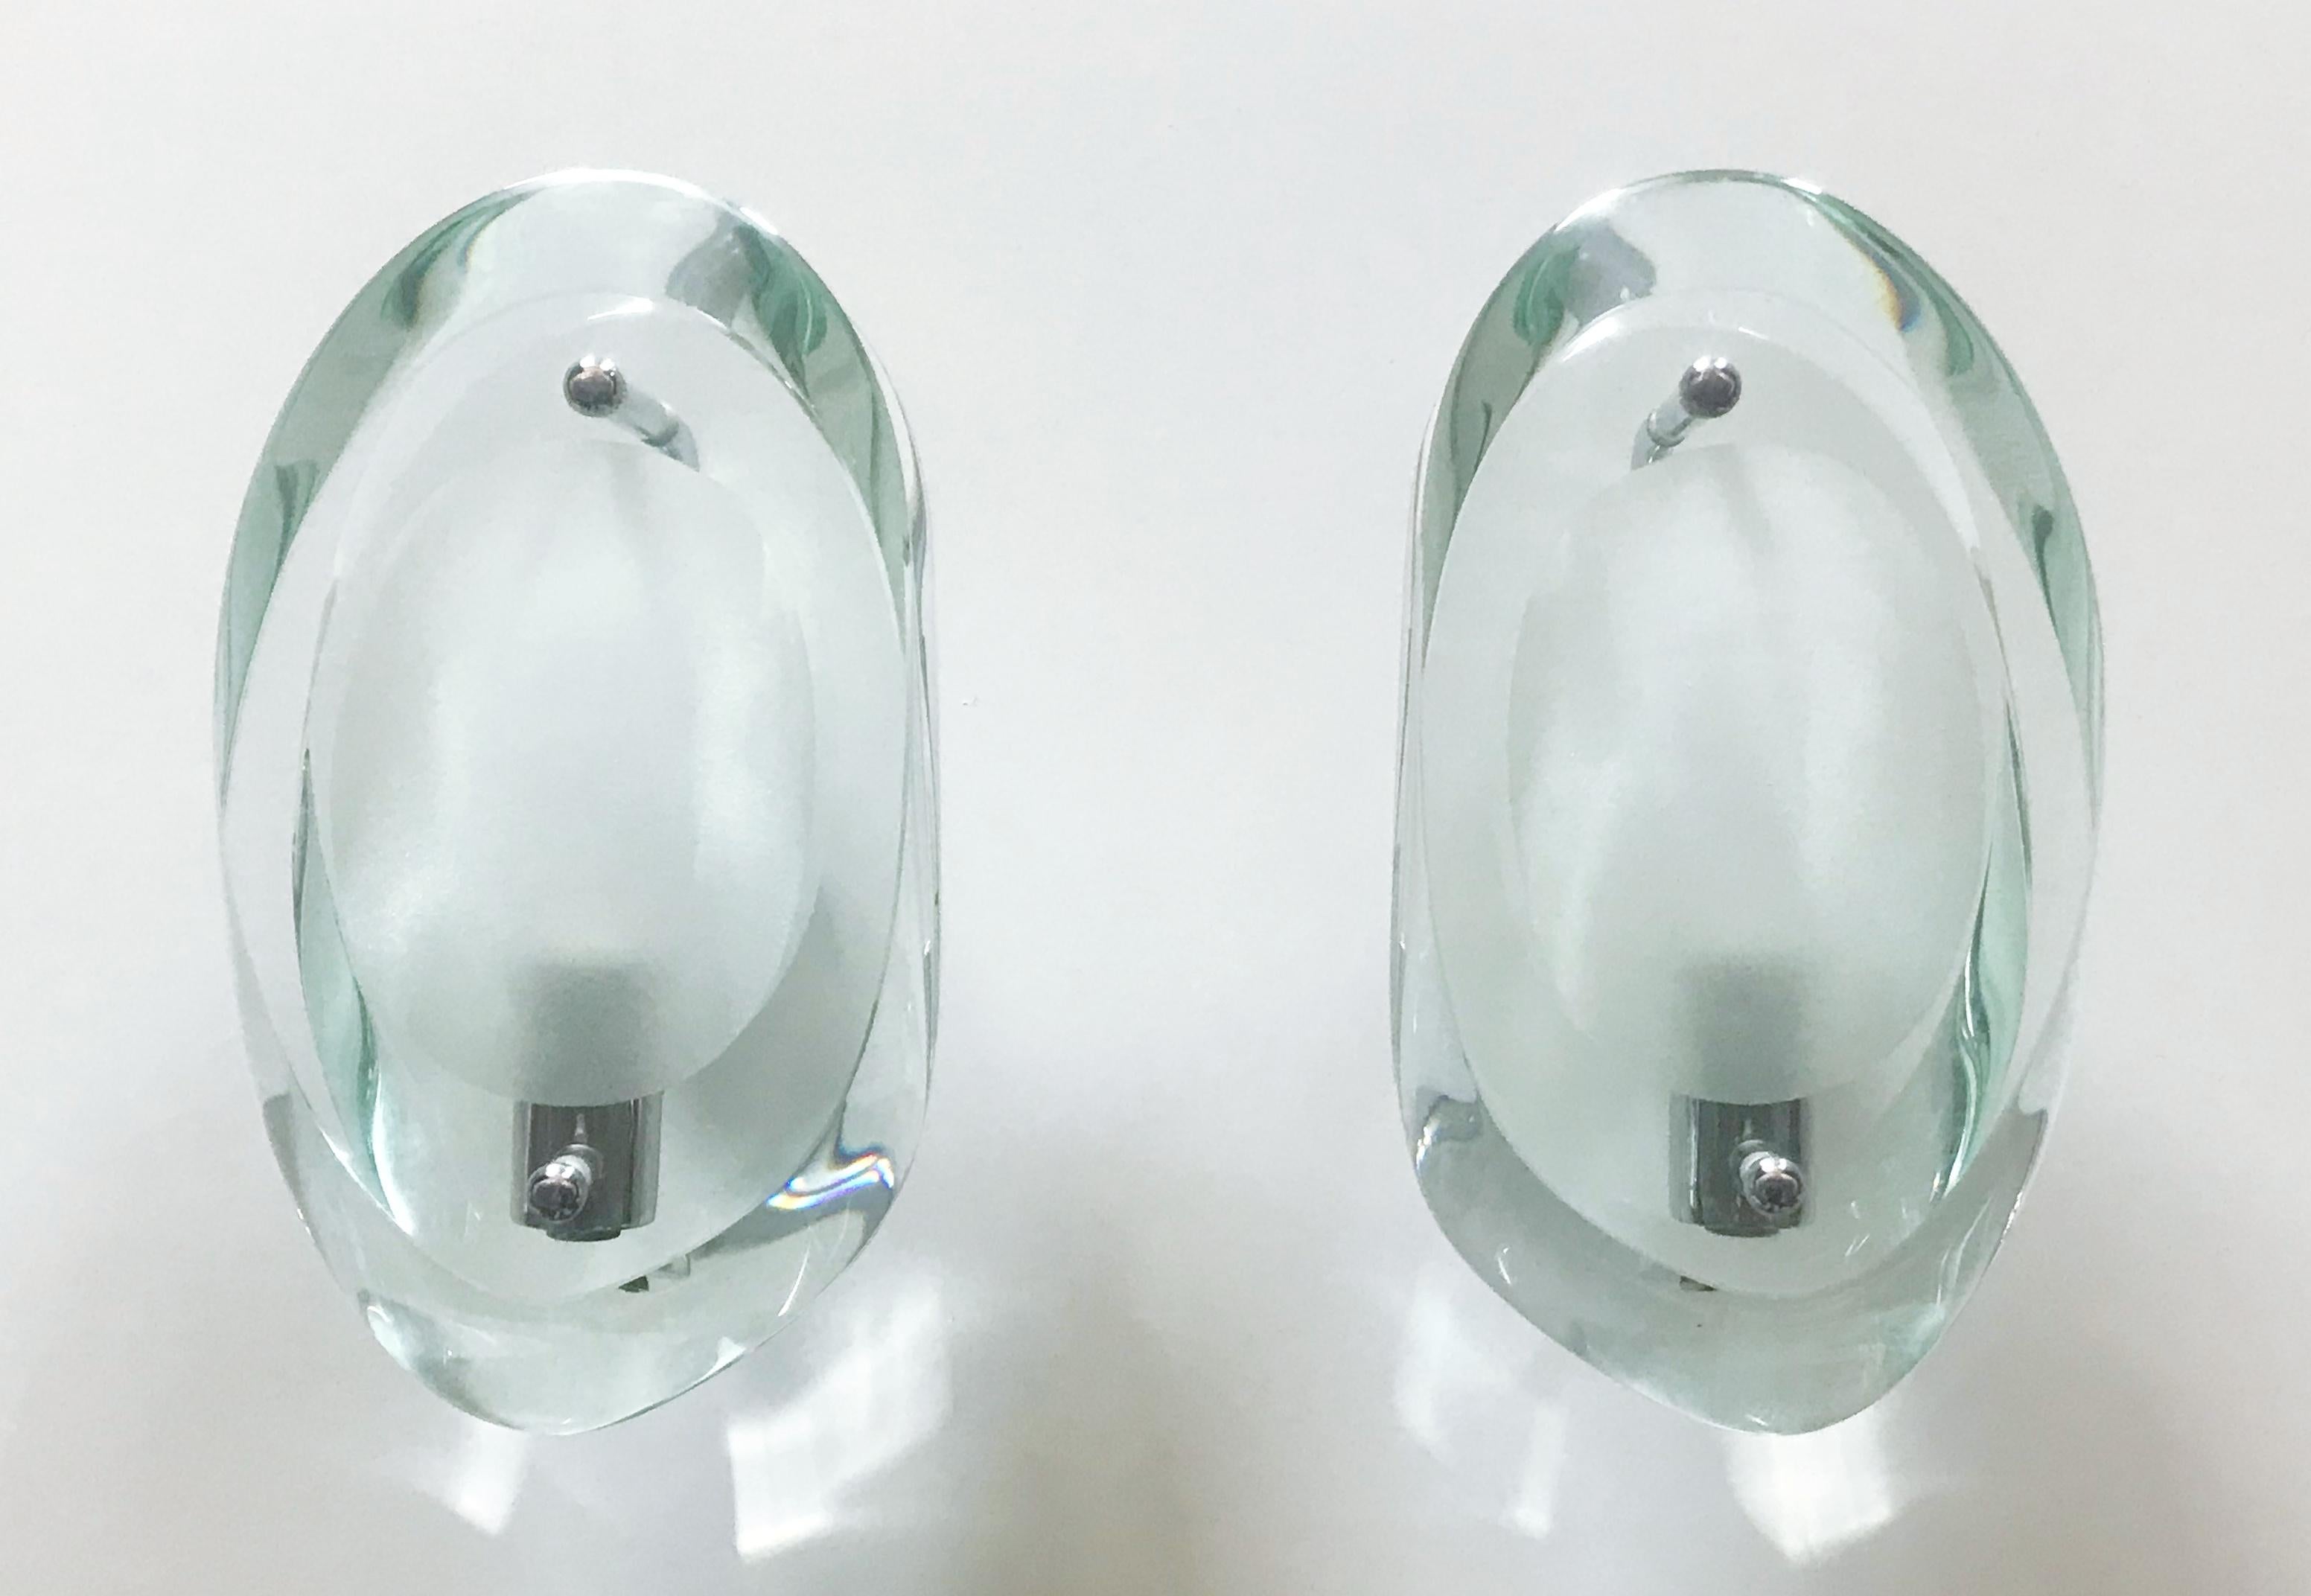 Original model 2093 wall lights with thick bevelled clear glasses, ground oval centre, and bevelled sides held on nickel metal mounts / Designed by Max Ingrand for Fontana Arte, circa 1960s / Made in Italy.
1 light / original E14 type / max 40W